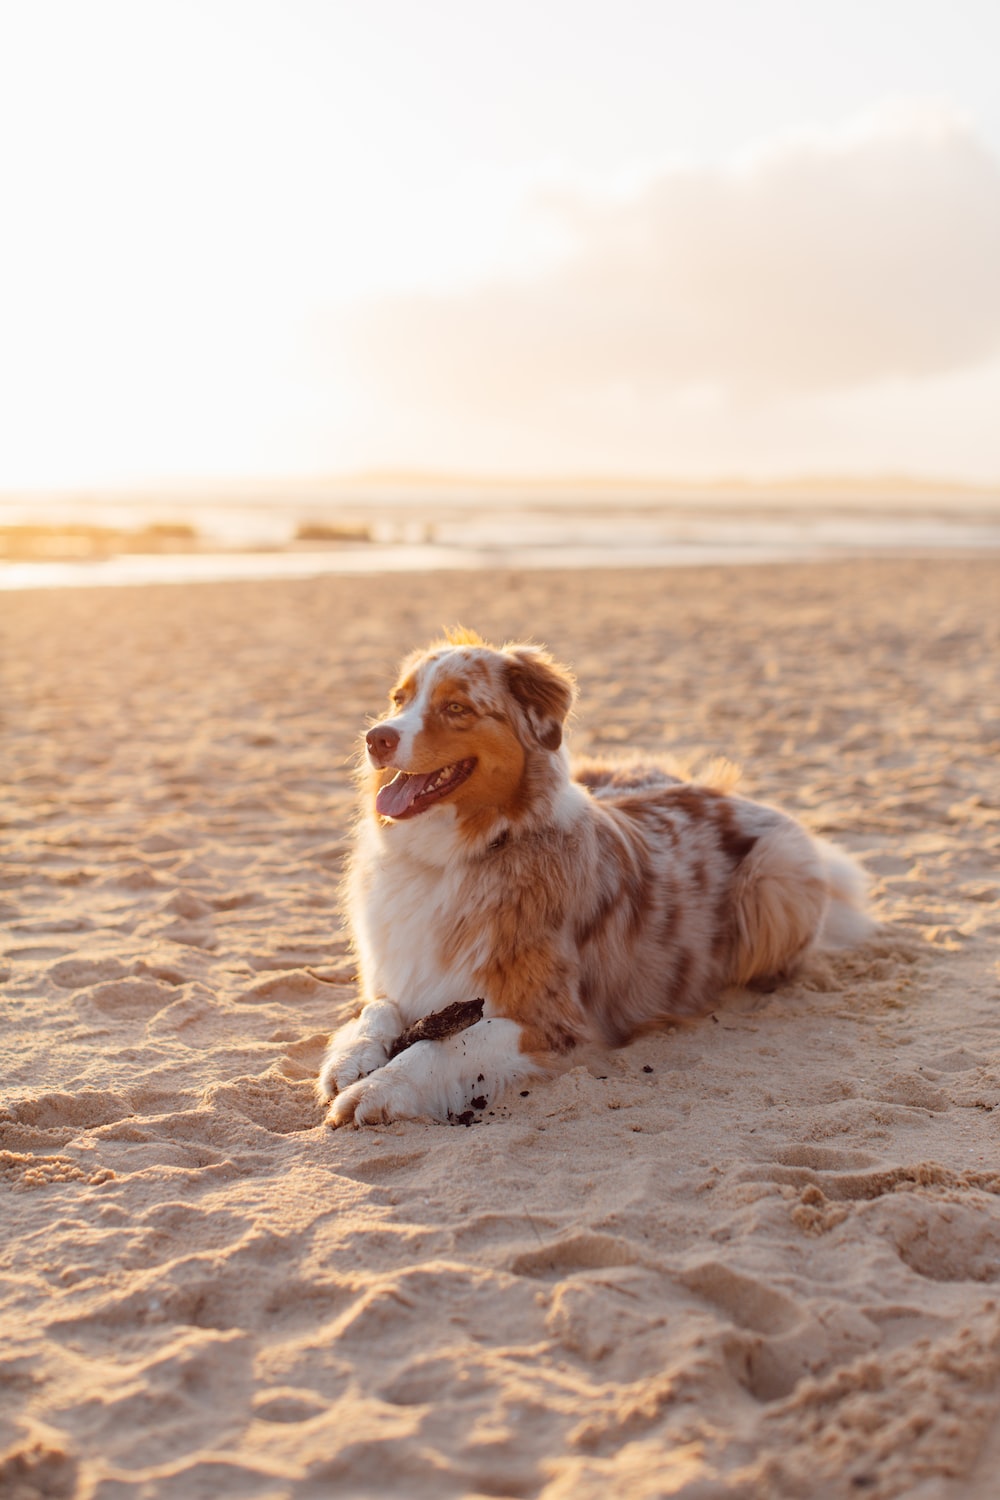 Dog On Beach Picture. Download Free Image